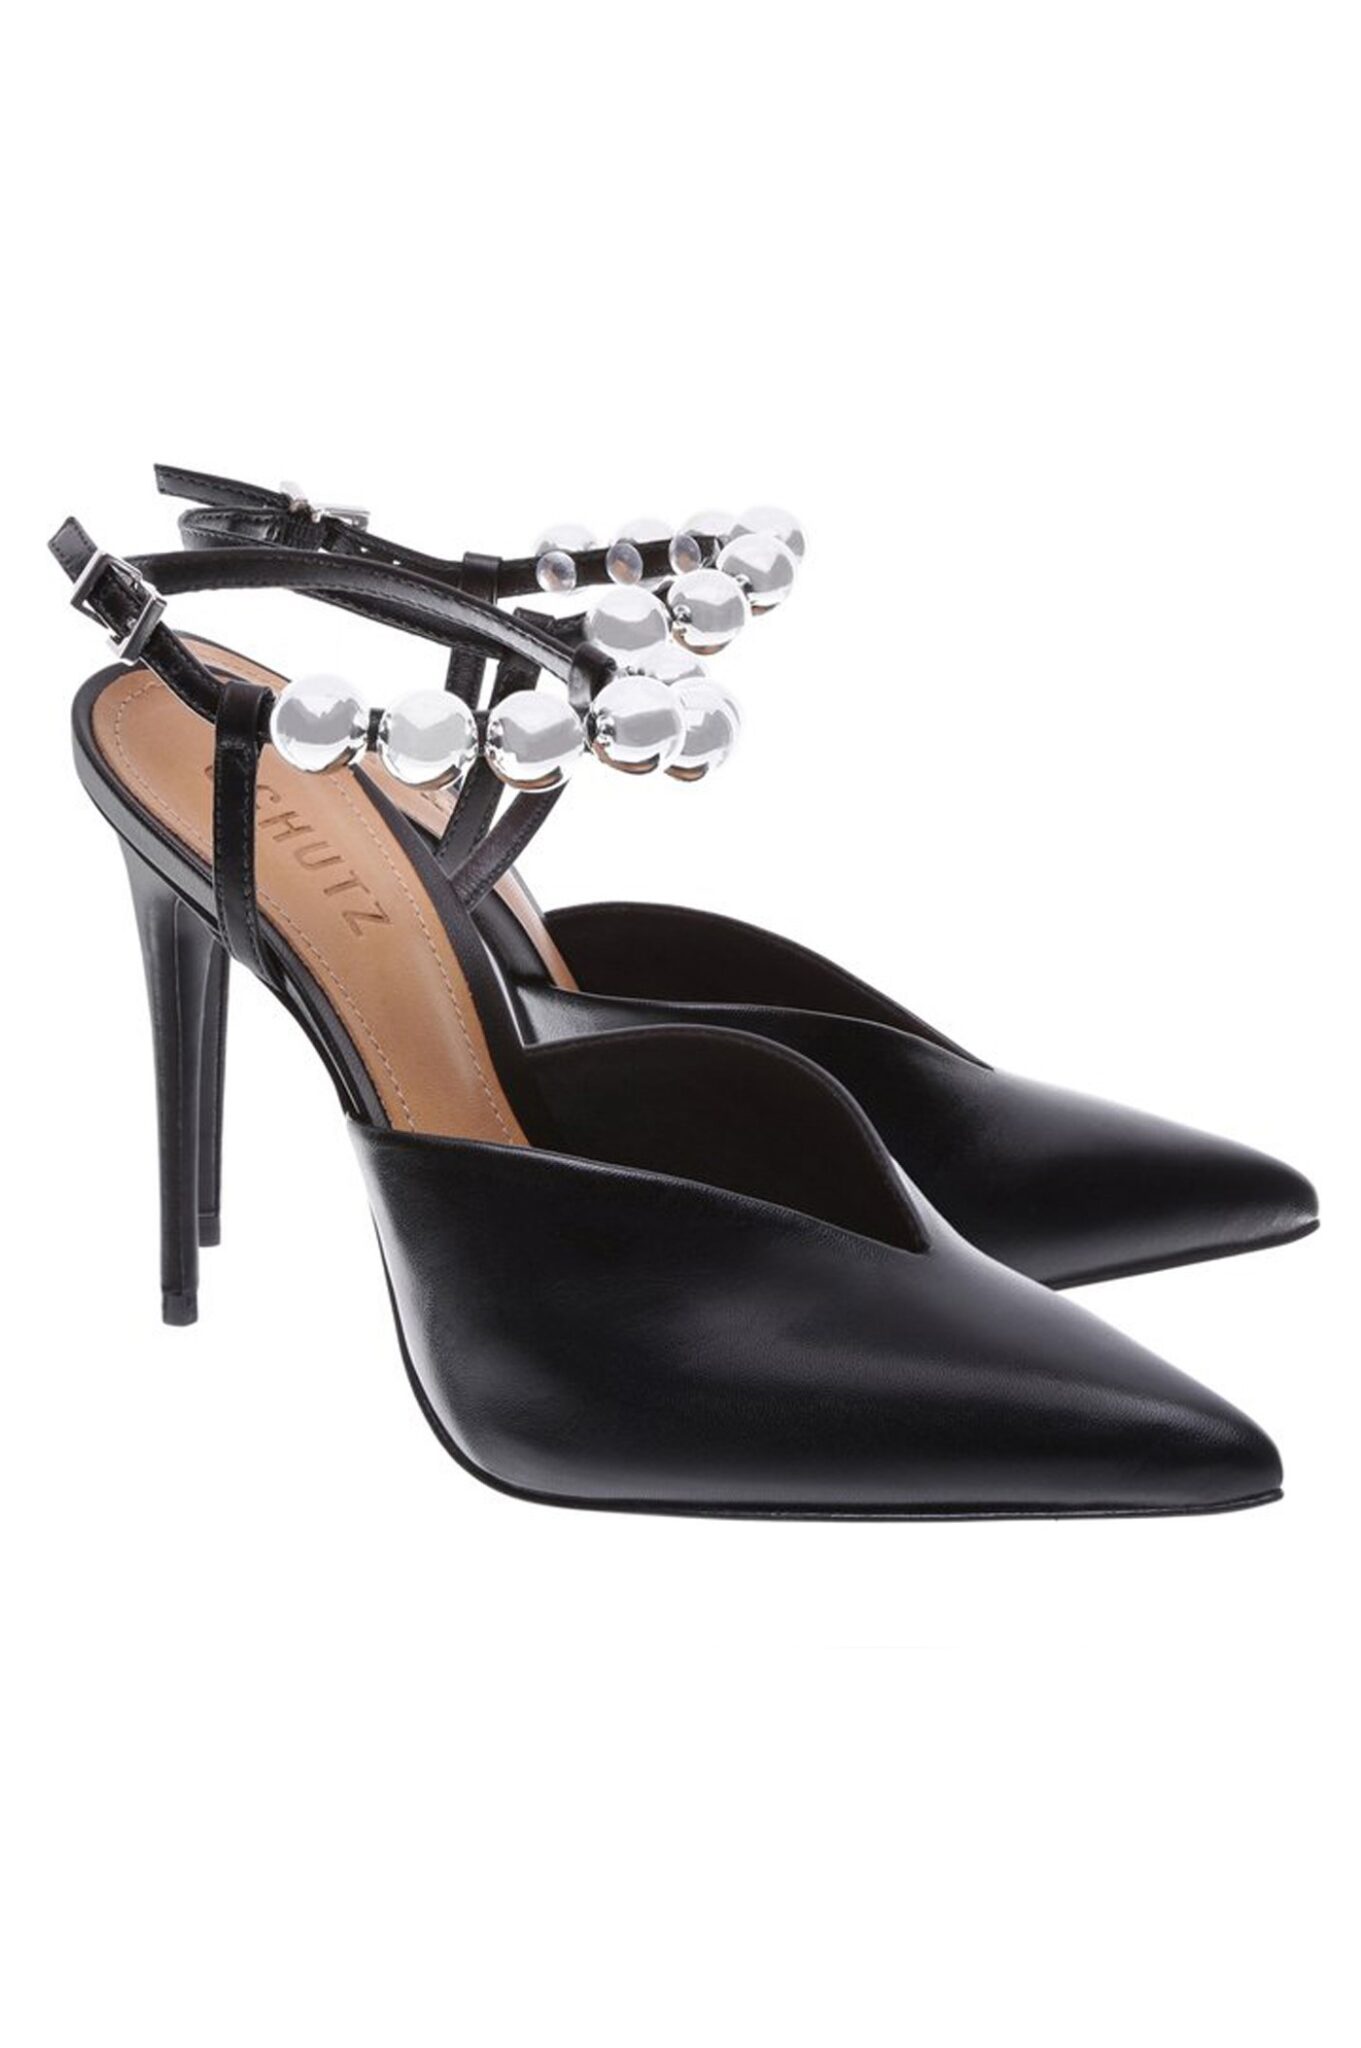 Black leather and silver embellished stiletto heels - SCHUTZ